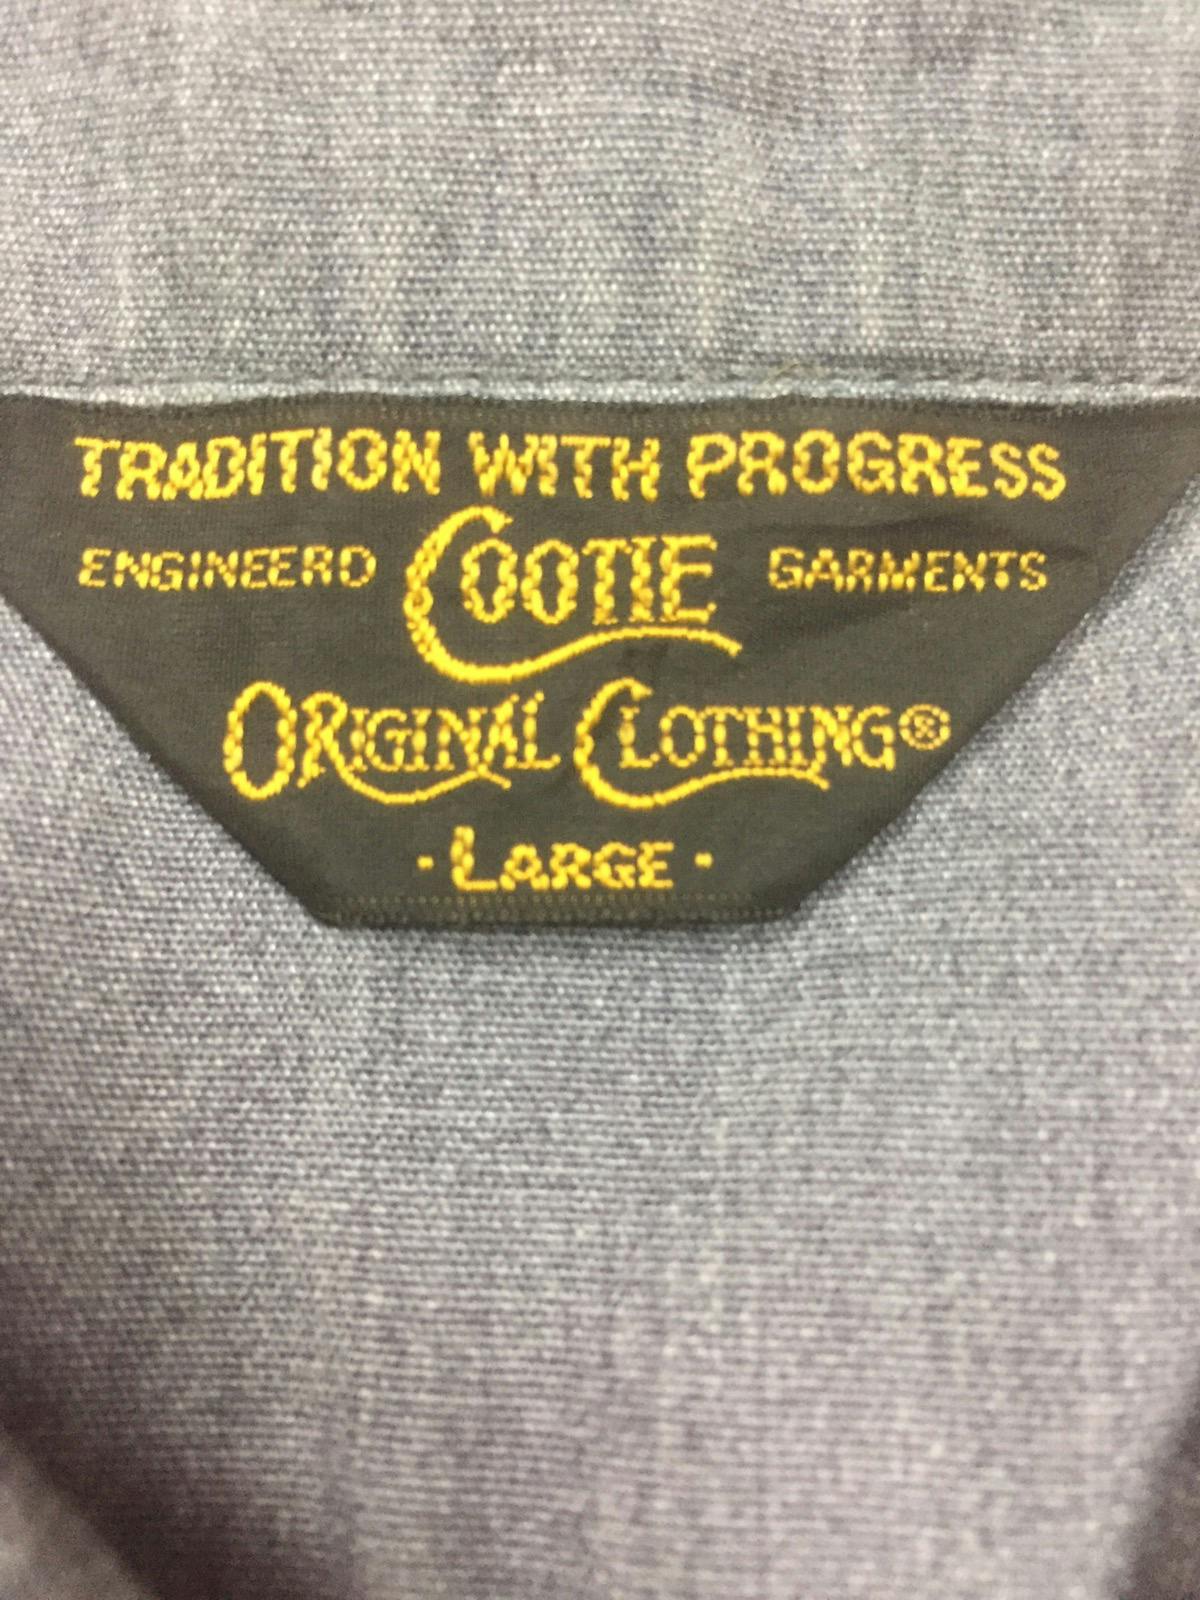 Cootie bowling shirt embroidery - 5